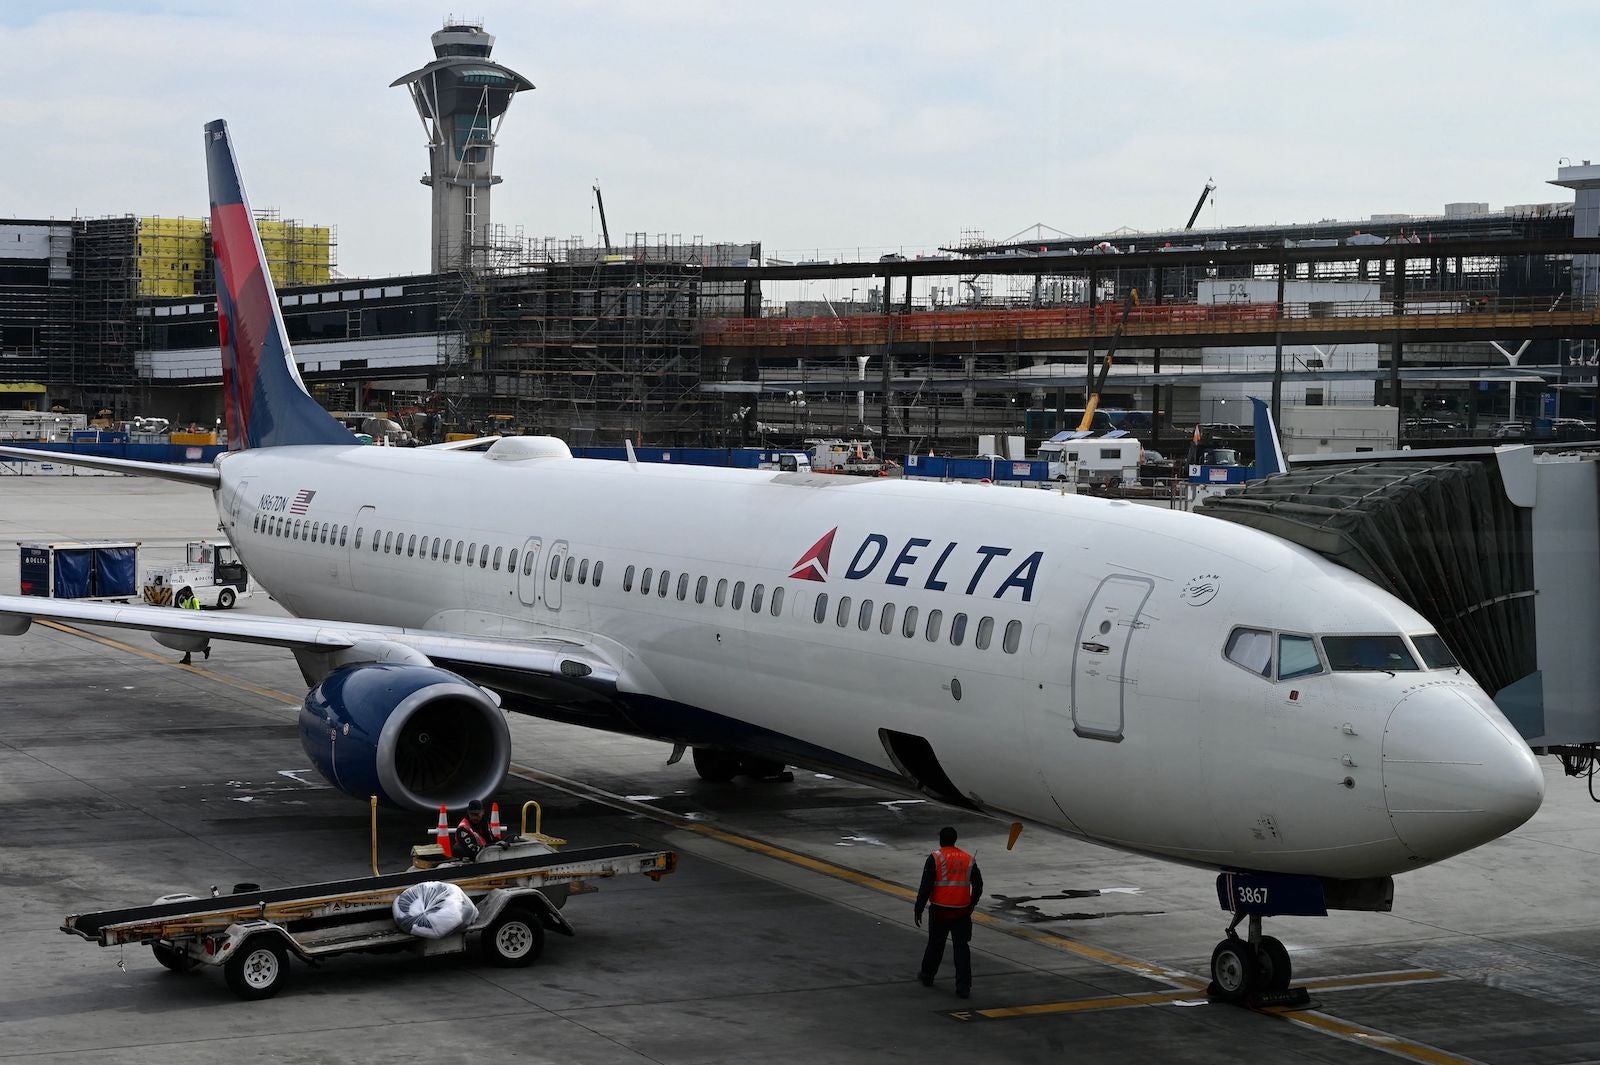 Delta Air Lines Boeing 737 at the gate in Los Angeles